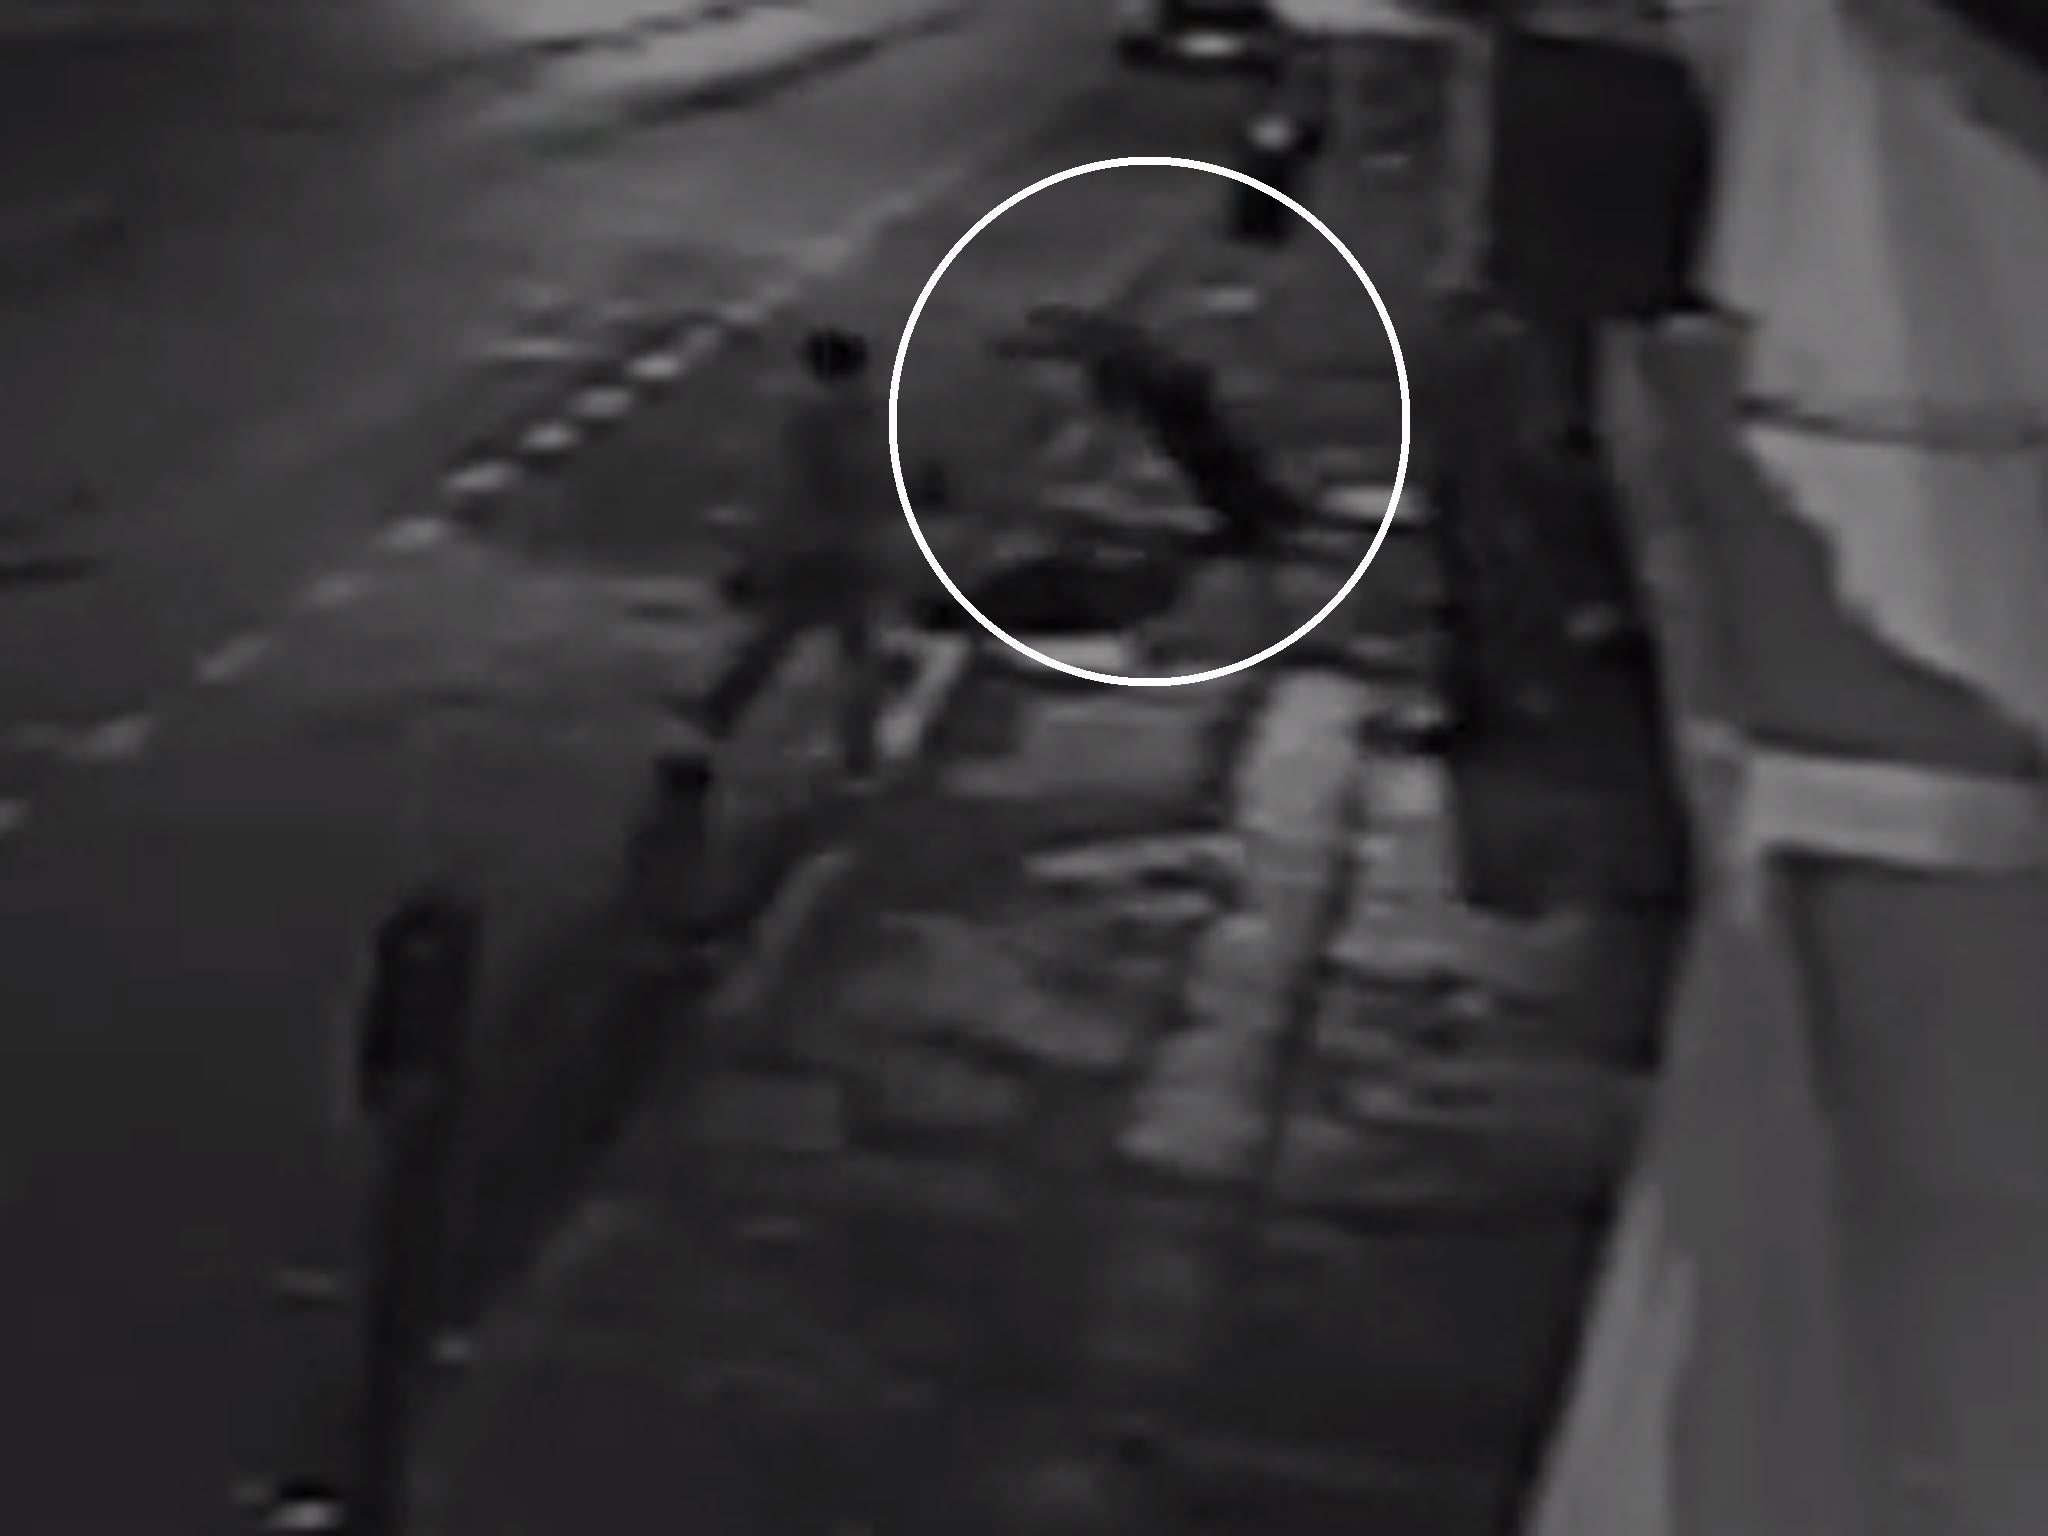 The moment the man falls to the ground after he is knocked unconscious by a mugger